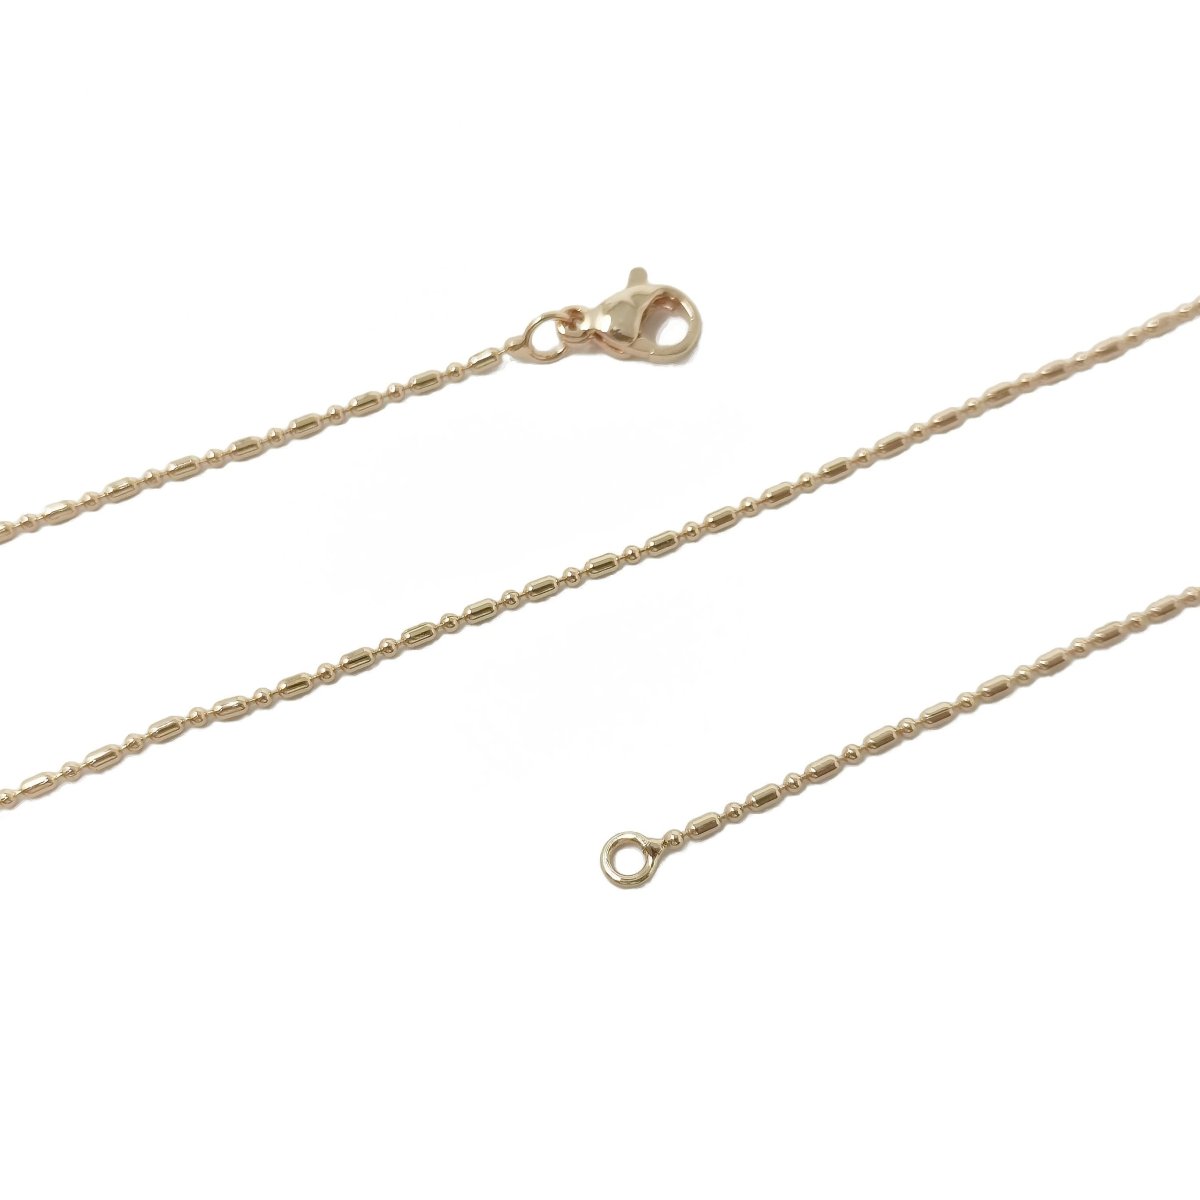 16, 17.8, 19.8 inches Gold Filled Bead Necklace - 1.2mm, 14K Gold Filled Bead Necklace w/ Lobster Clasps | CN-900, CN-901, CN-902 Clearance Pricing - DLUXCA